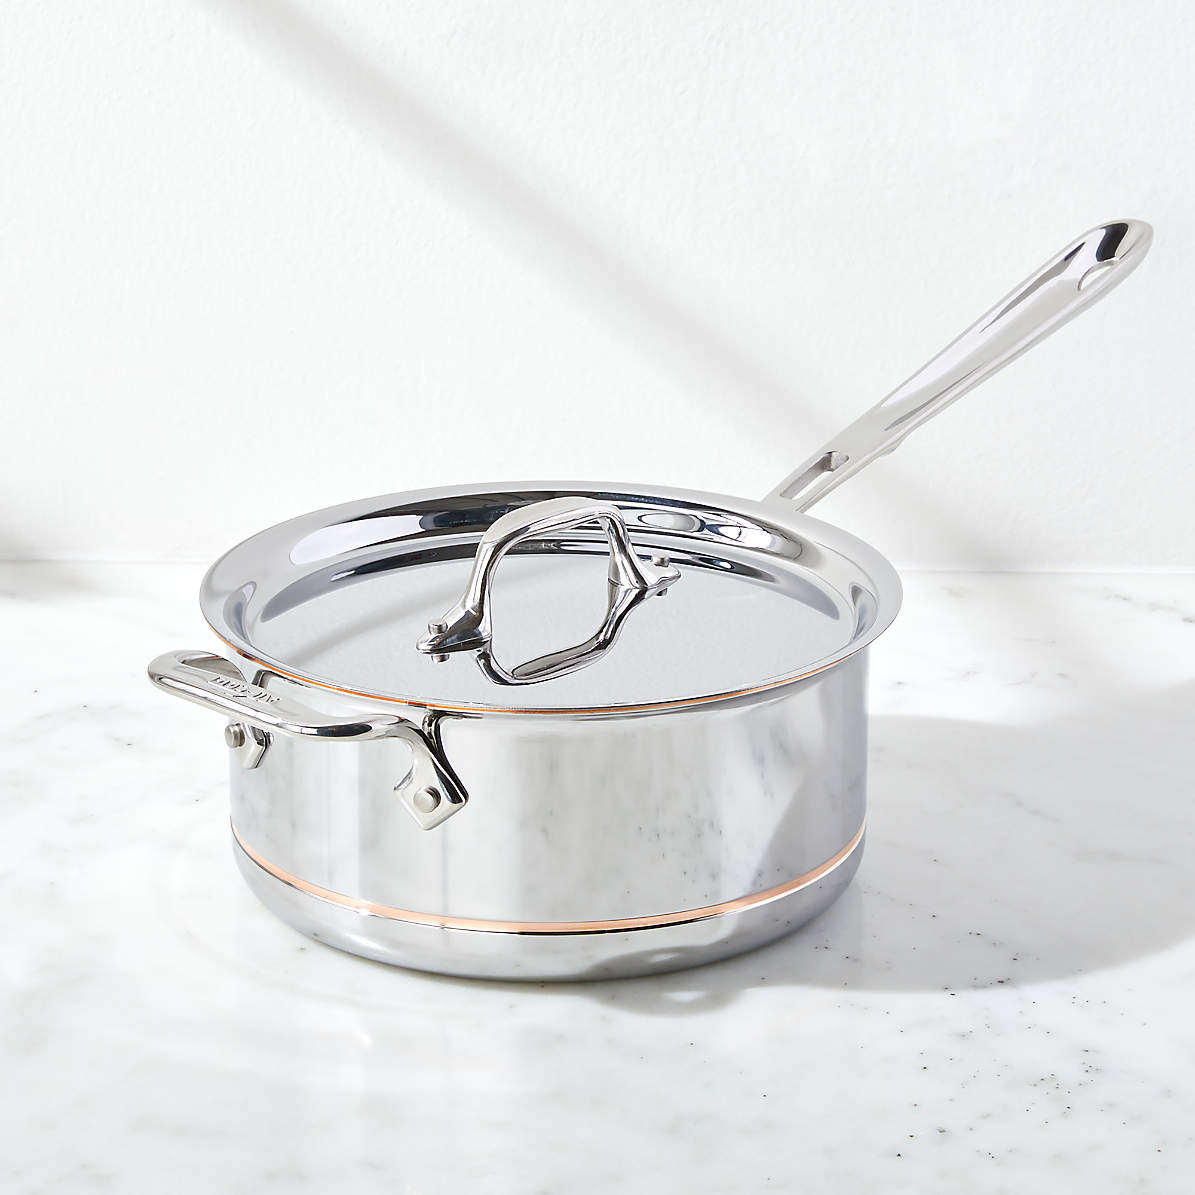 All-Clad Copper Core 3-Quart Saucepan with Loop and Lid + Reviews